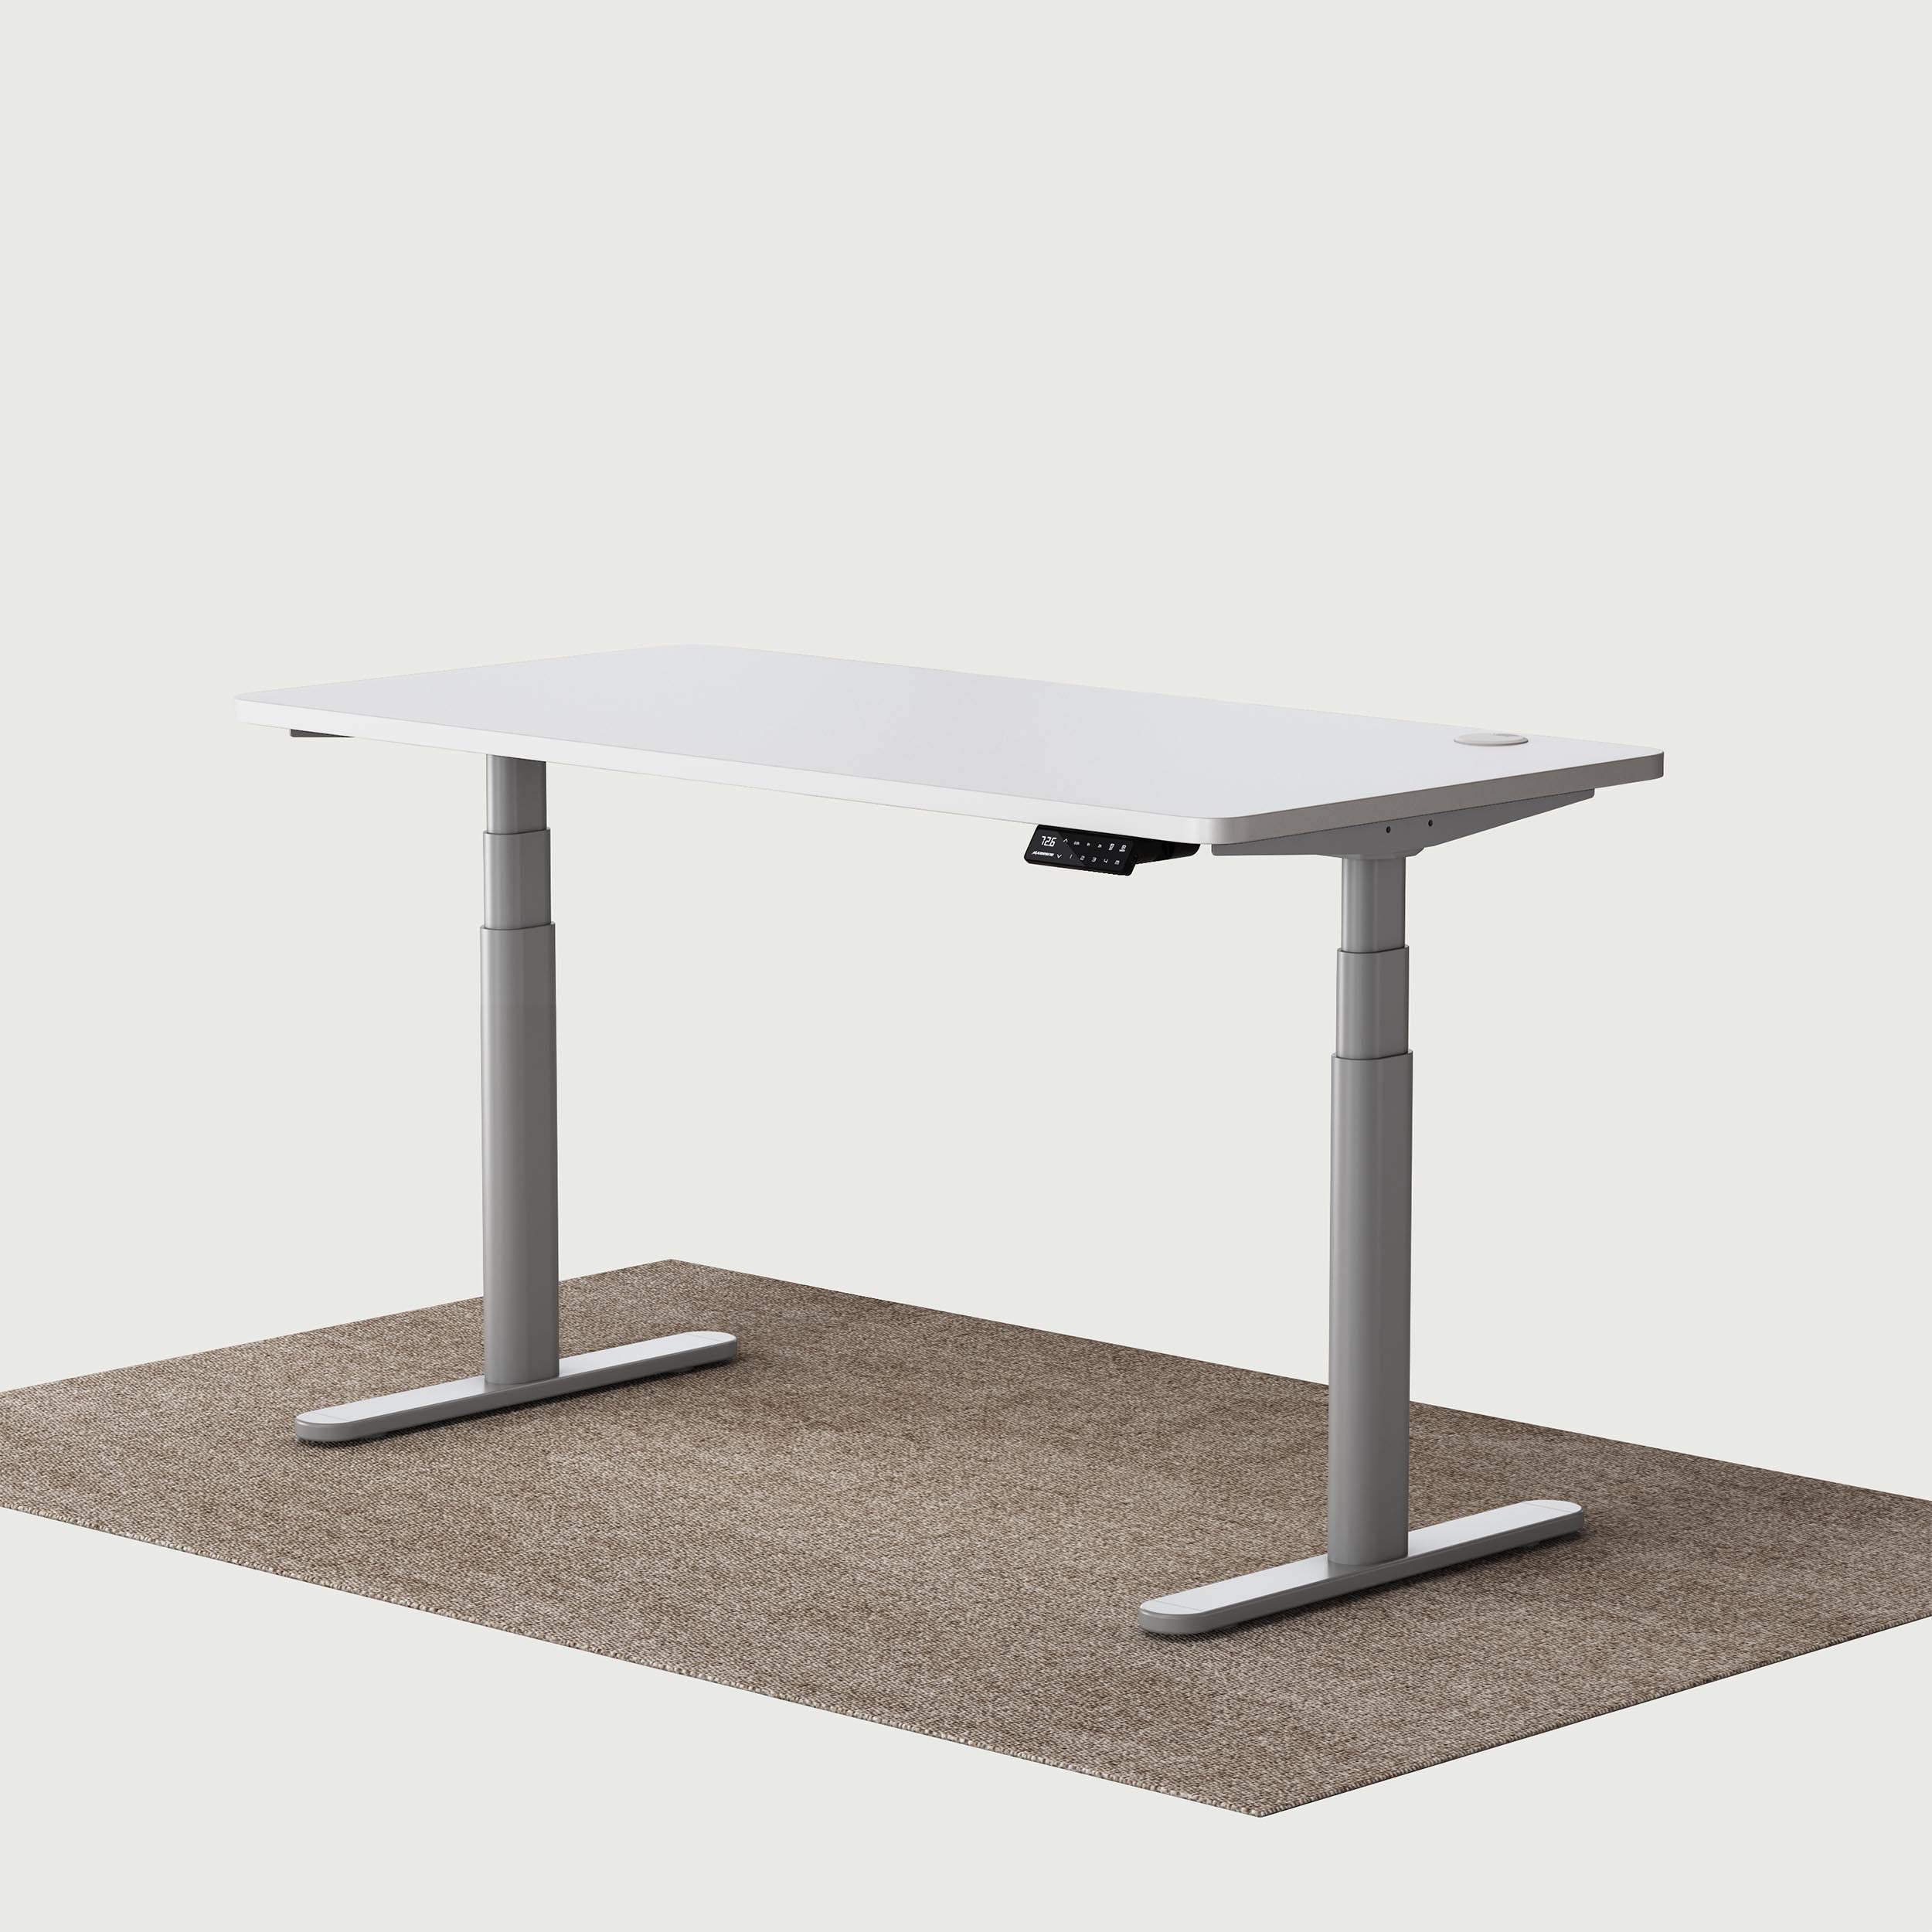 TH2 Pro Plus grey oval electric standing desk frame with white 140x70 cm desktop